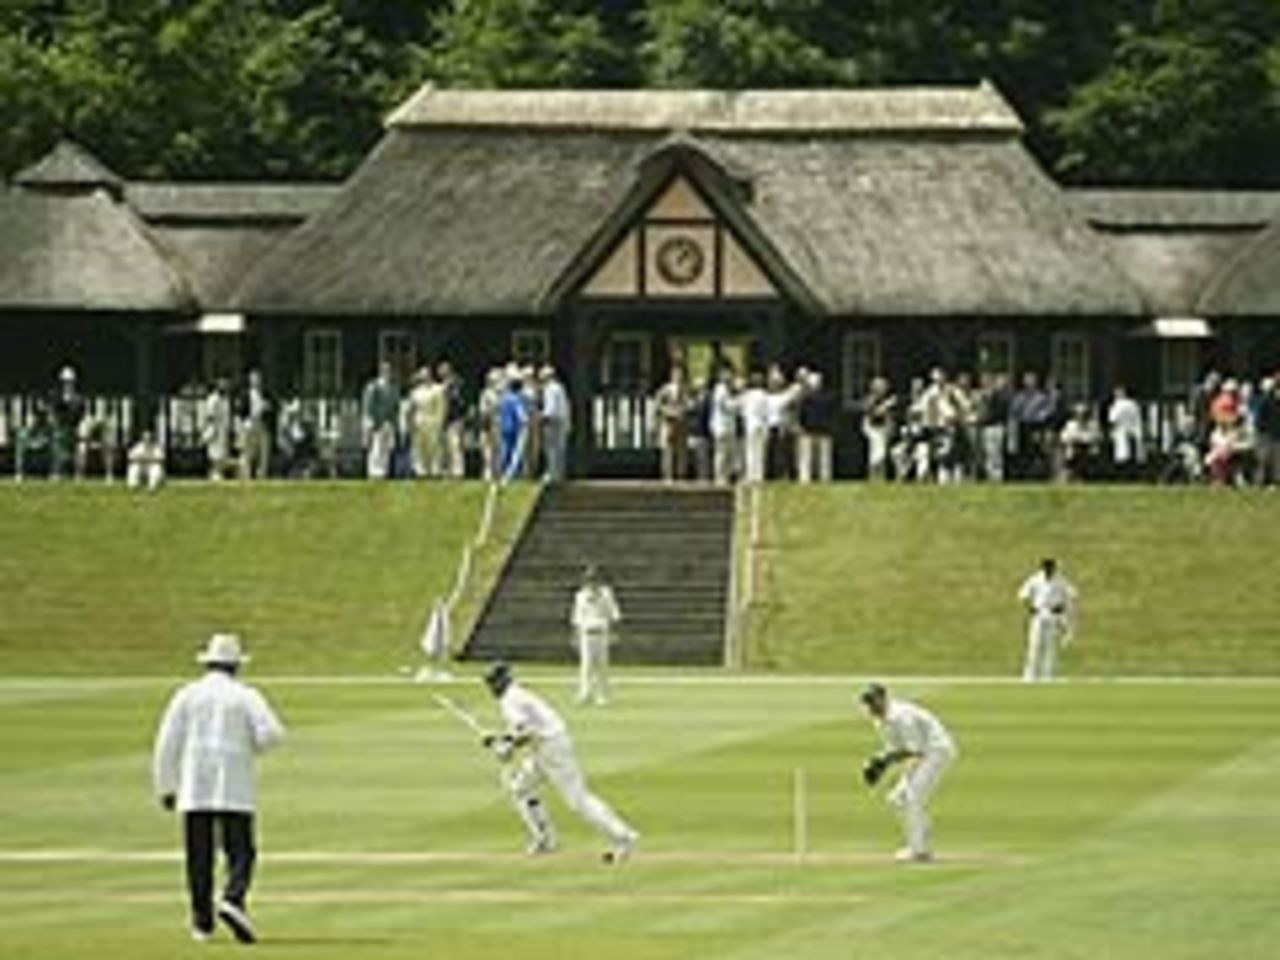 Herschelle Gibbs bats during the invitation match between Sir Paul Getty's XI and South Africa on June 23, 2003 at the late Sir Paul Getty's Wormsley Estate, Wormsley